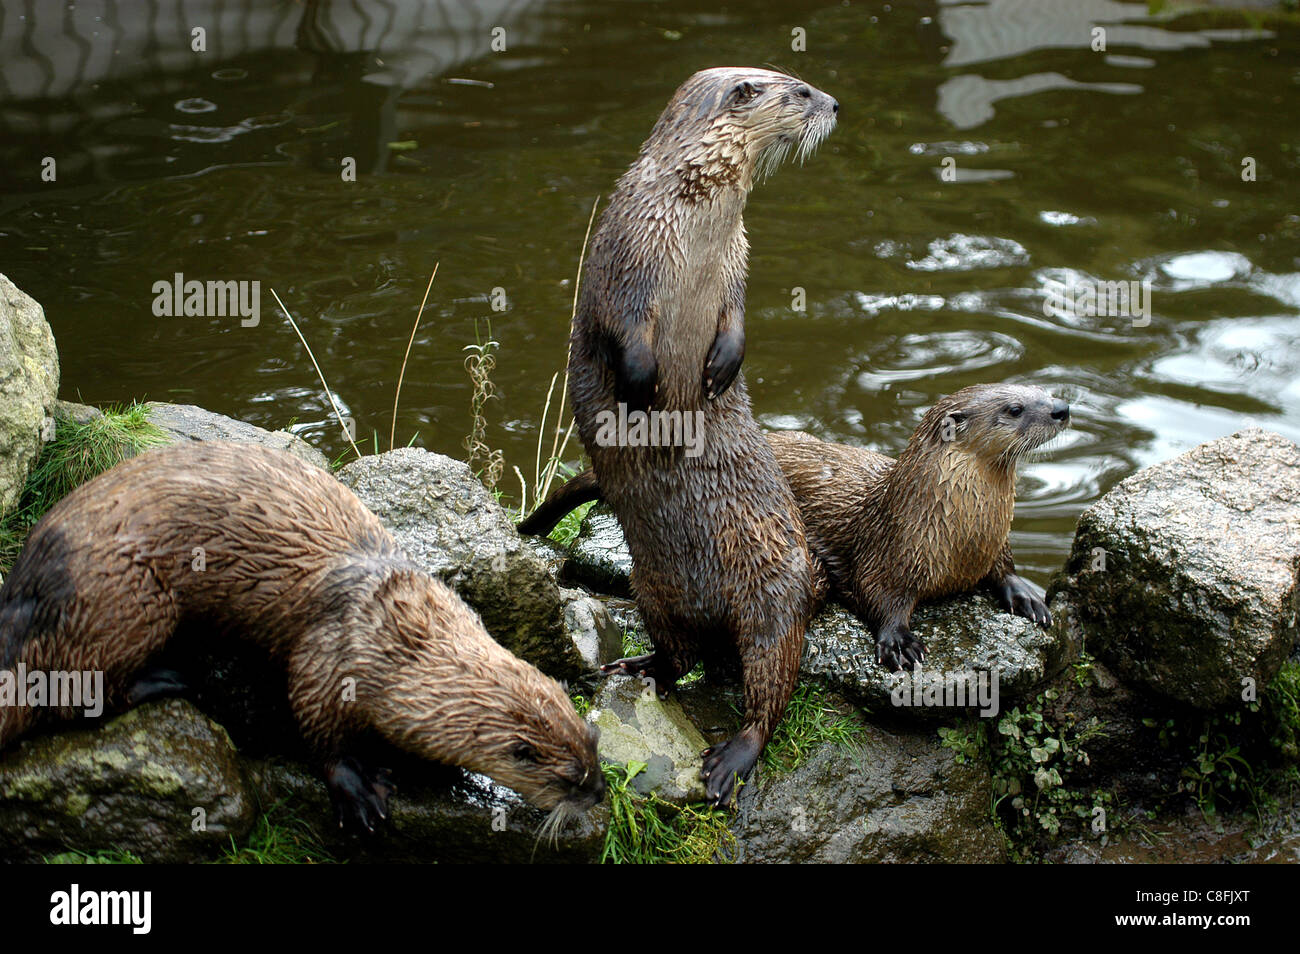 The British or European Otters in captivity. Stock Photo